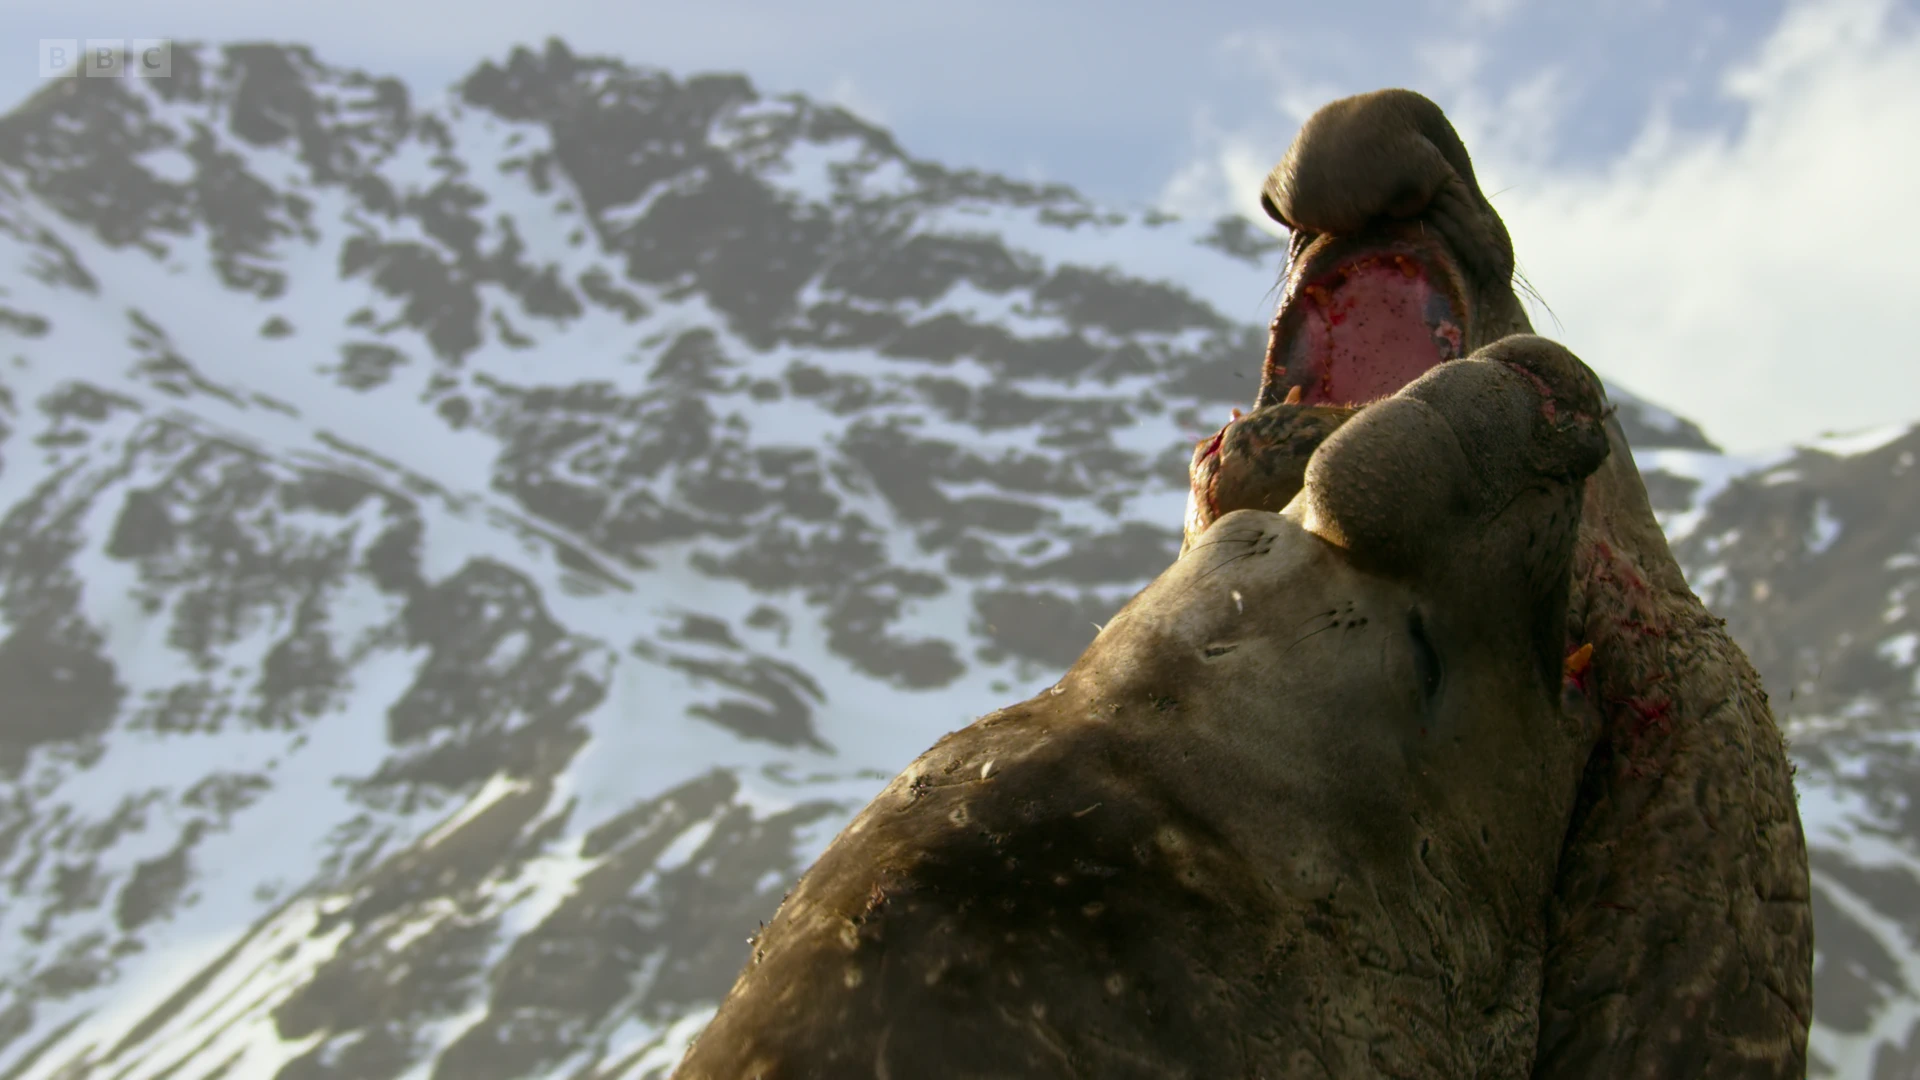 Southern elephant seal (Mirounga leonina) as shown in Seven Worlds, One Planet - Antarctica